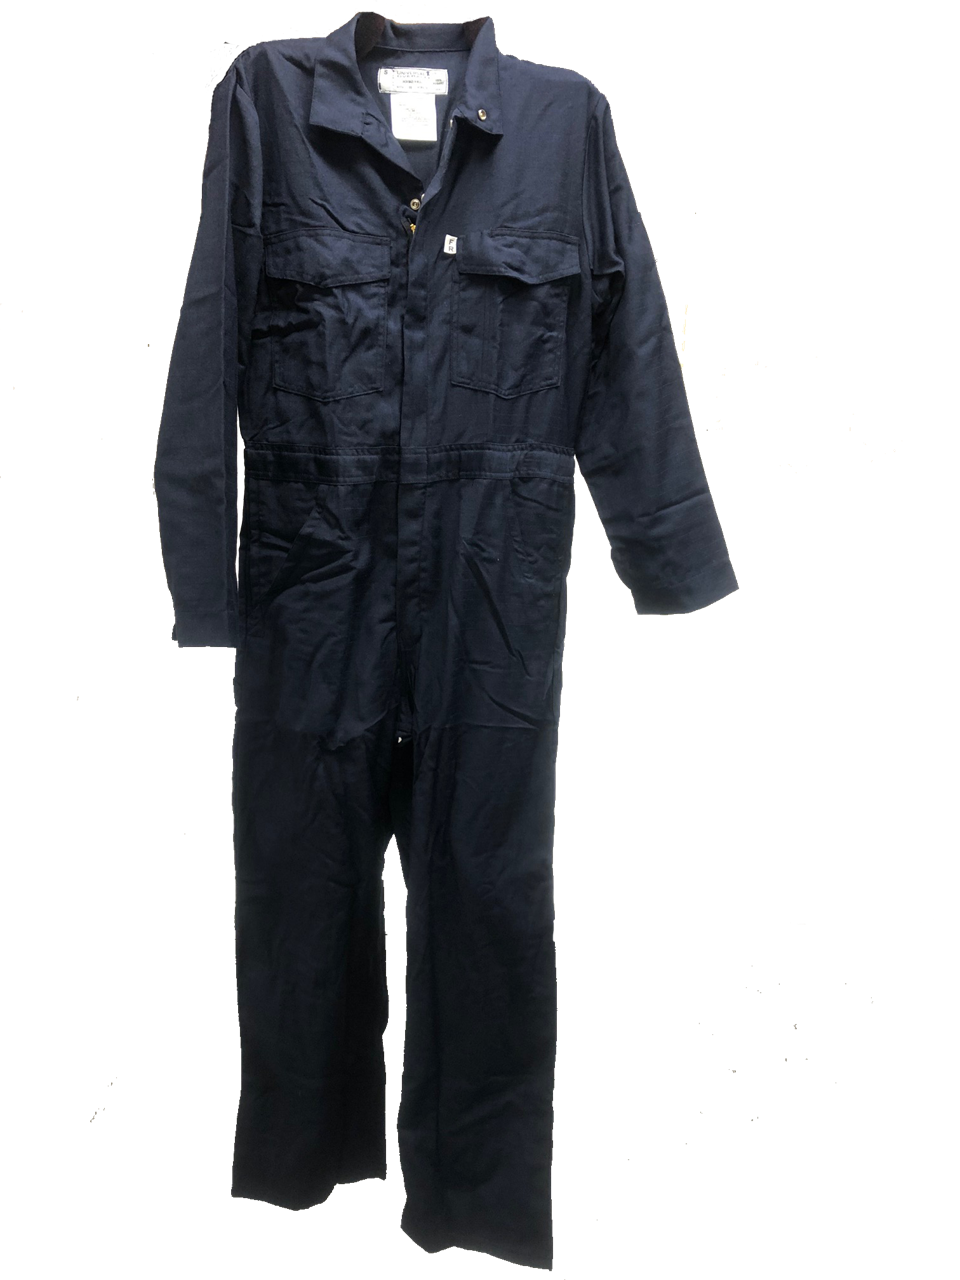 NuGard™ Navy Blue/Charcoal/Red-Burgundy Coverall | Buy Quality Uniforms ...